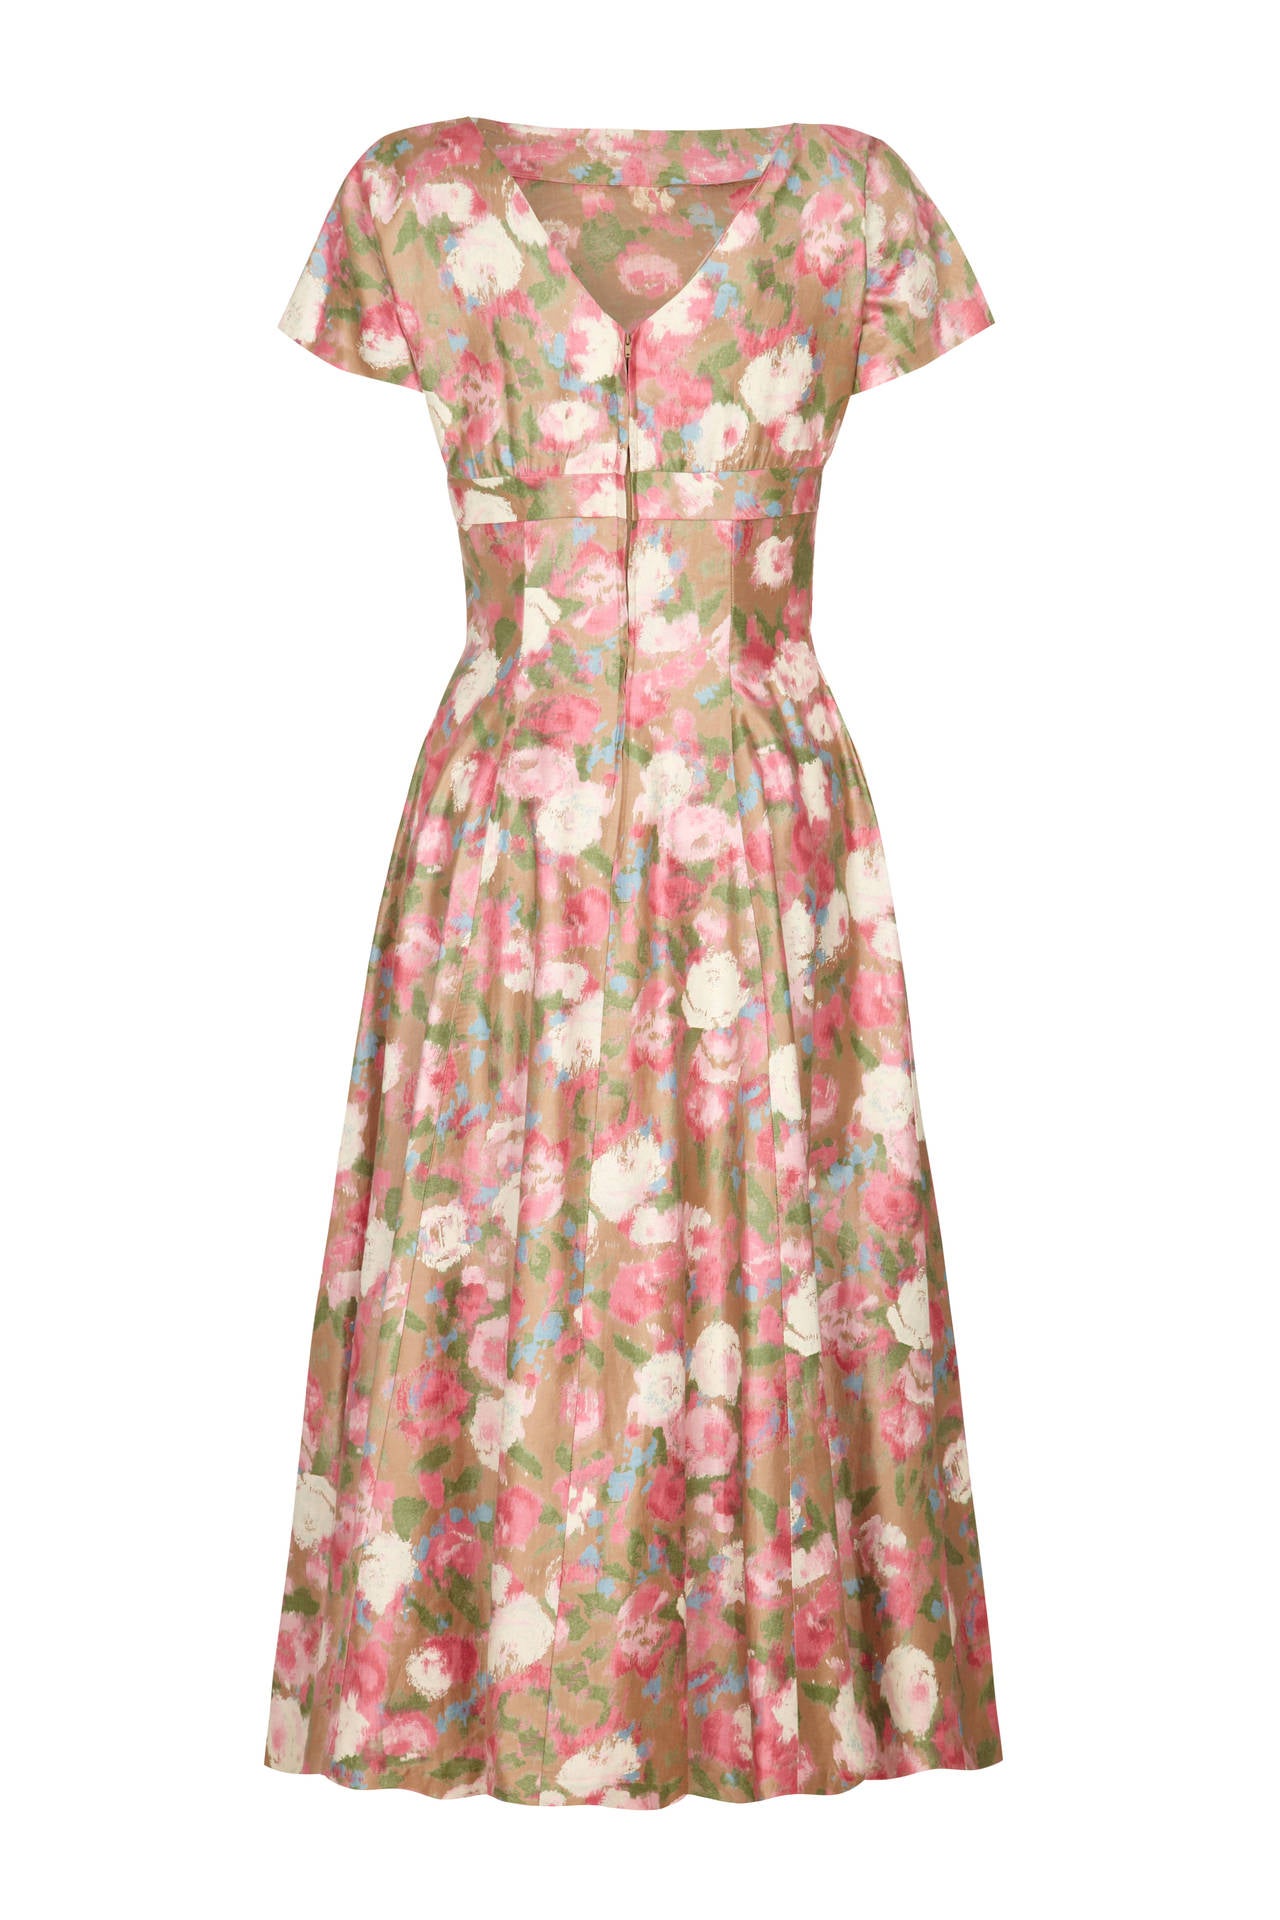 This exquisite feminine original 1950s polished cotton dress with pretty pale pink floral print features a classic full skirt and fitted waist with cap sleeves and a deep V to the back of the neckline.  Beautifully cut with a band under the bust it